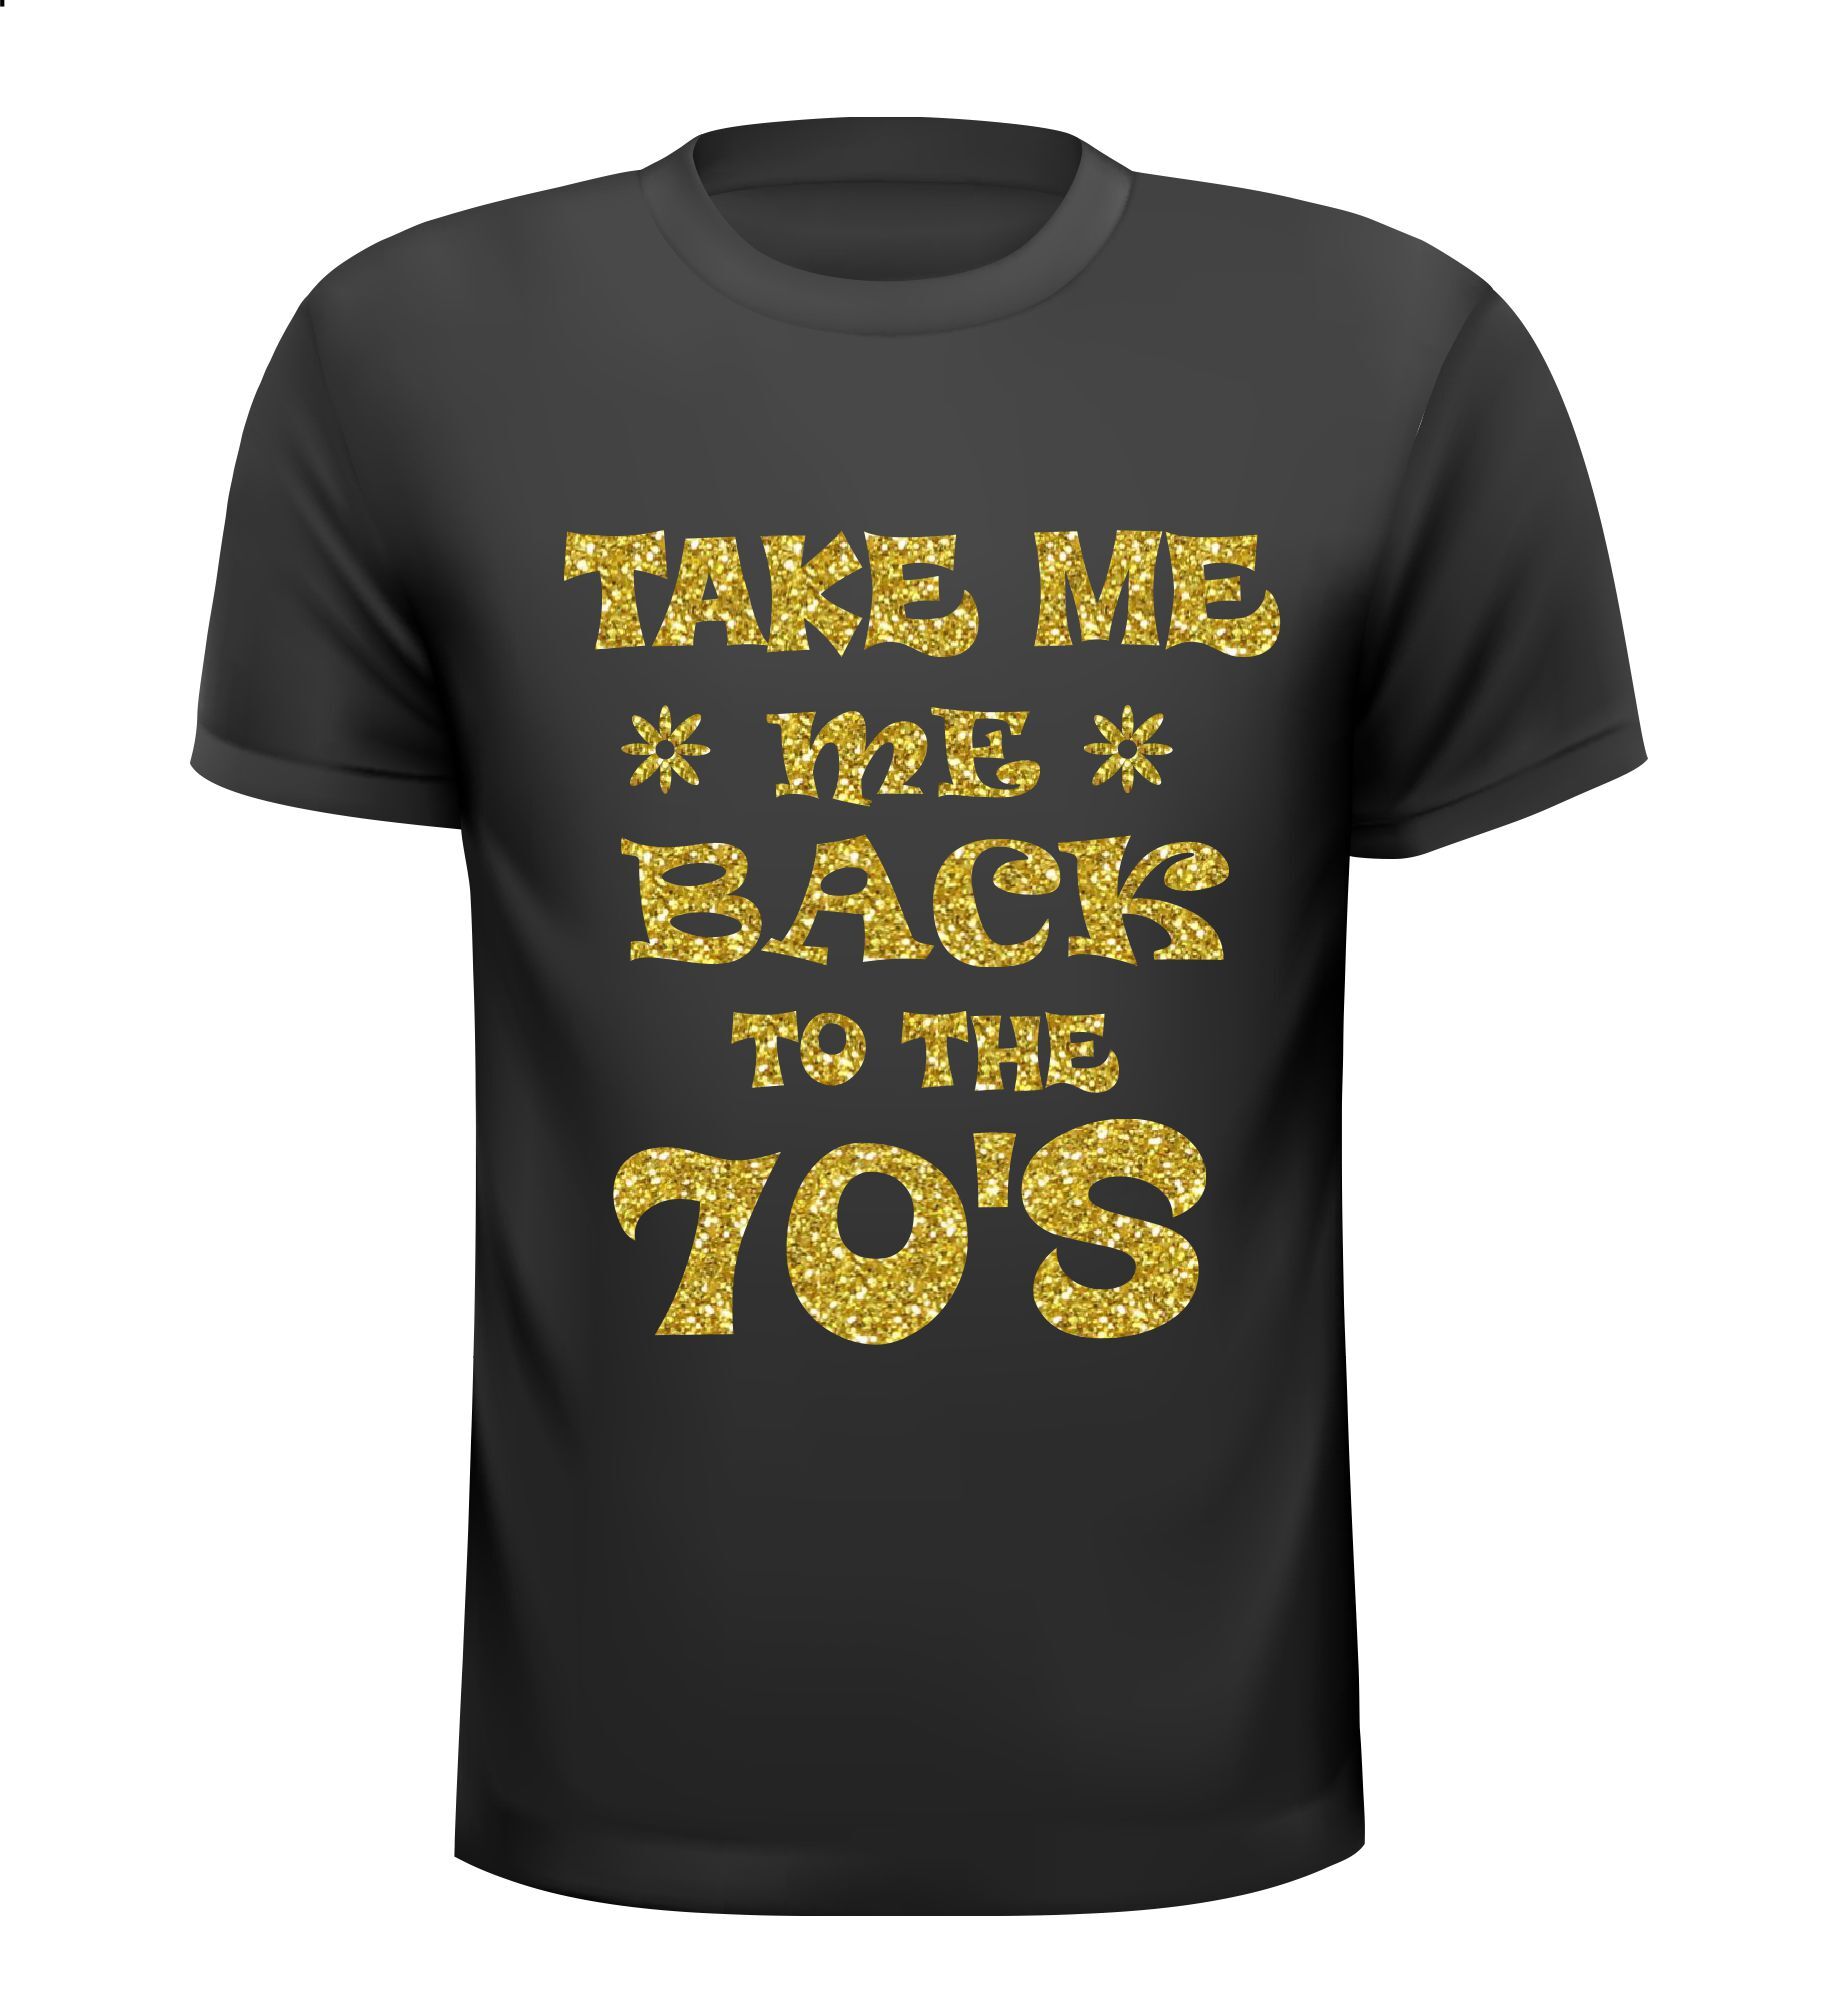 Take me back to the seventies t-shirt met foute gouden glitter opdruk